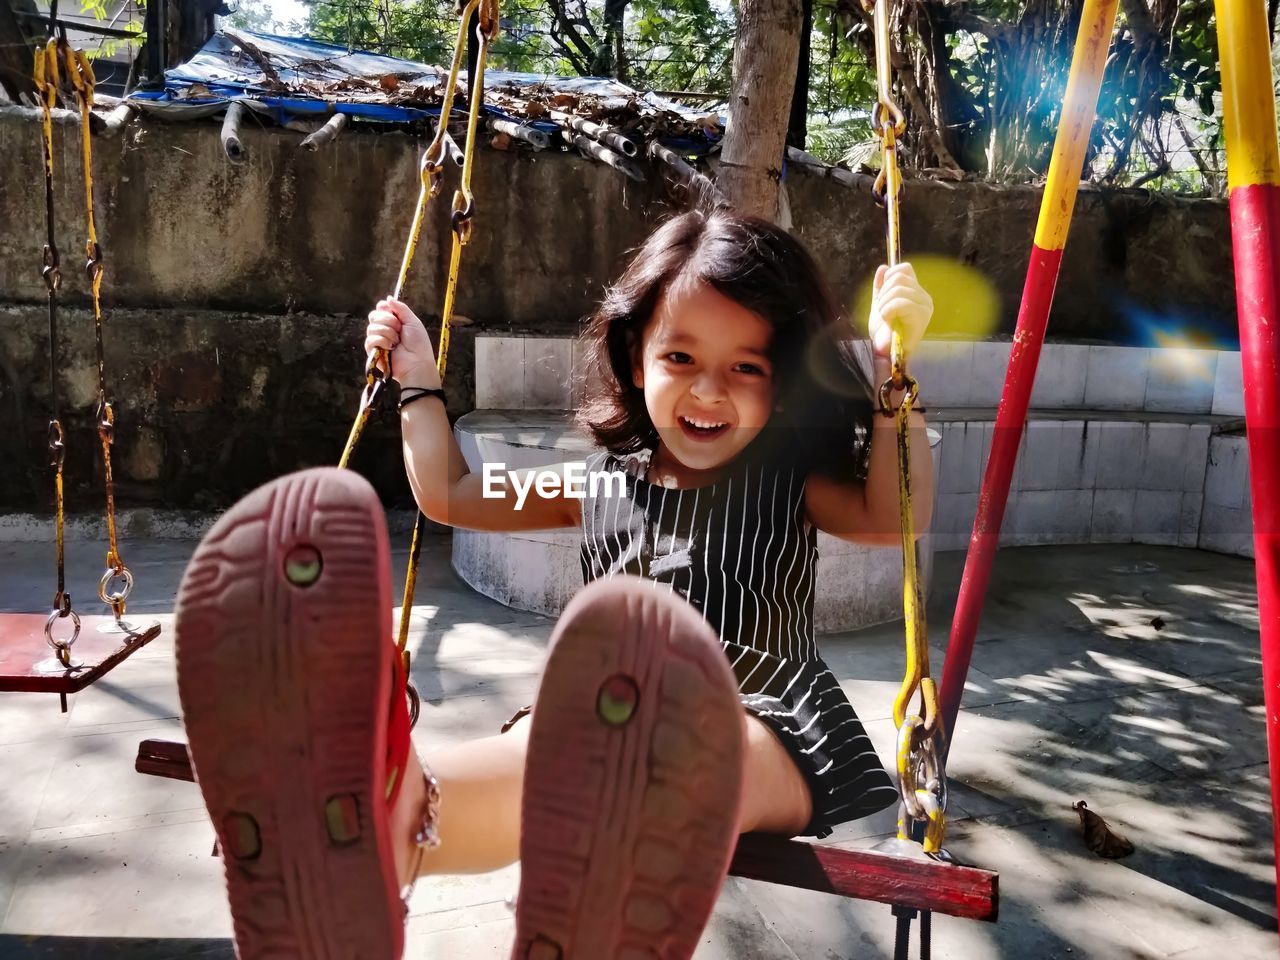 Portrait of smiling girl on swing in playground